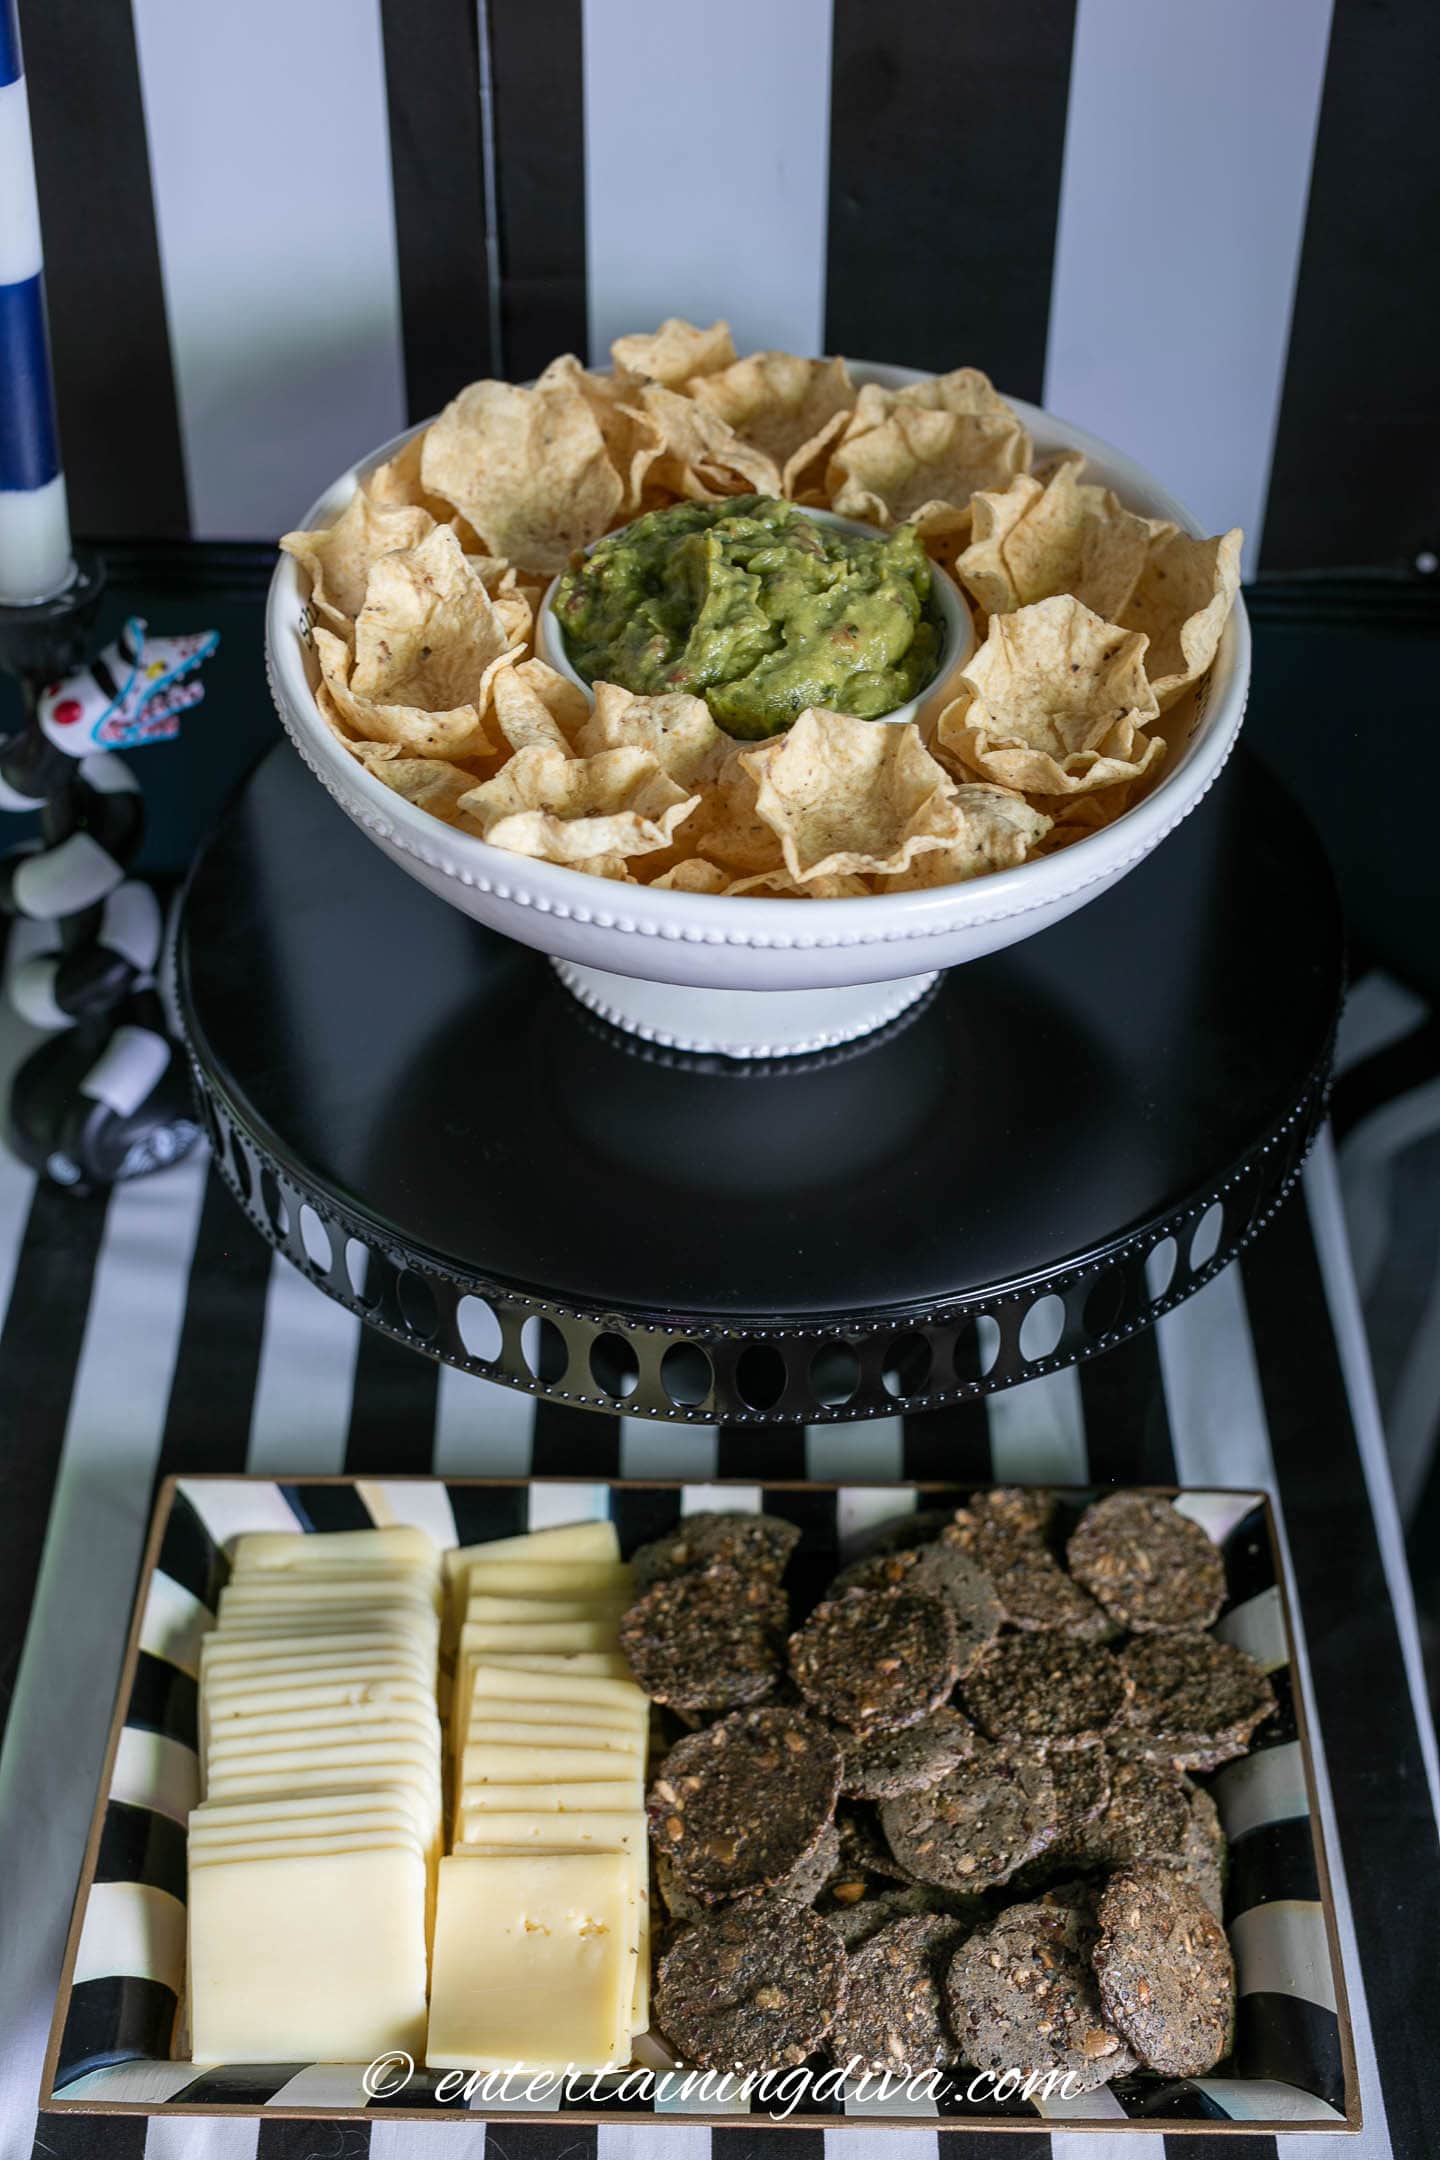 Guacamole and chips in a bowl above a plate of white cheese slices and black crackers at a Beetlejuice party.